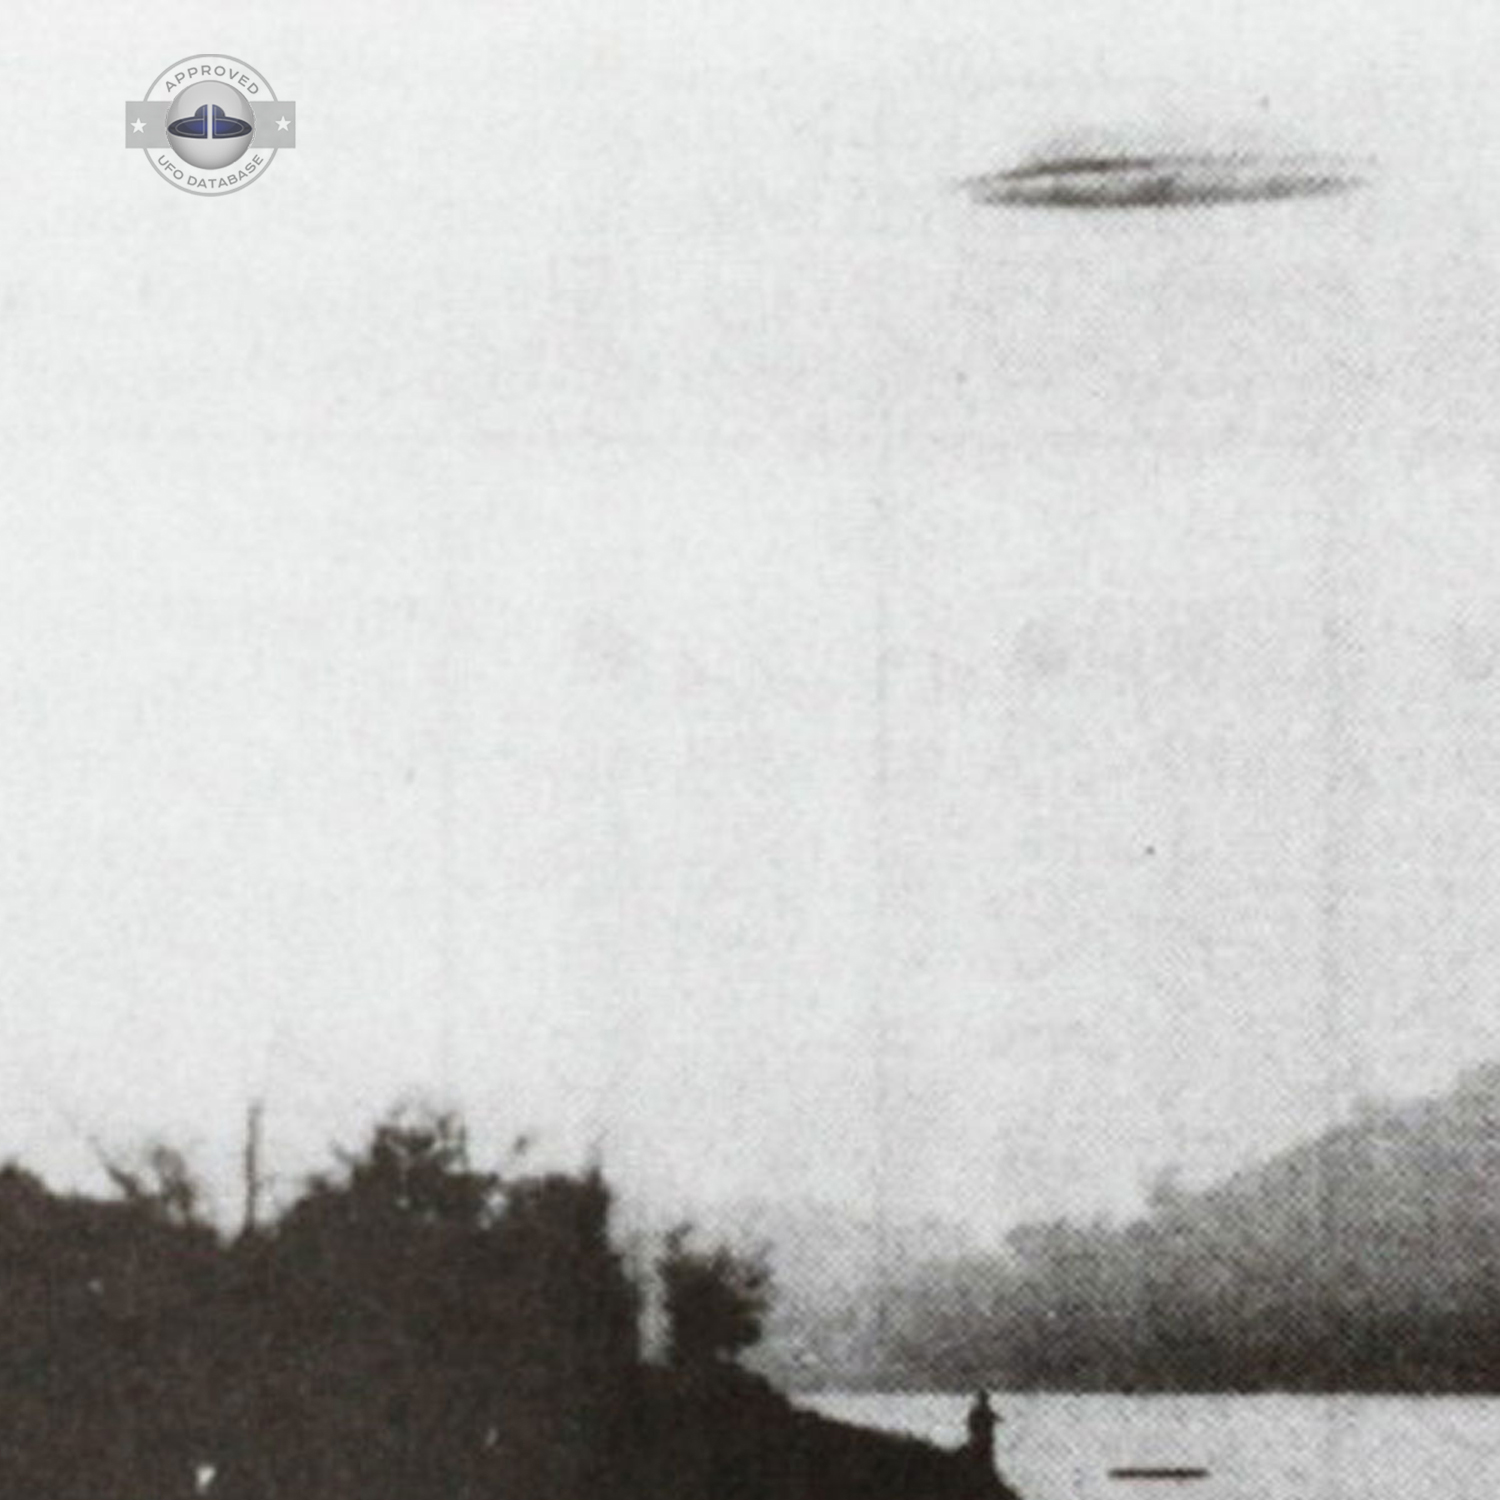 UFO over a fisherman and people in a canoe on a lake UFO Picture #45-2